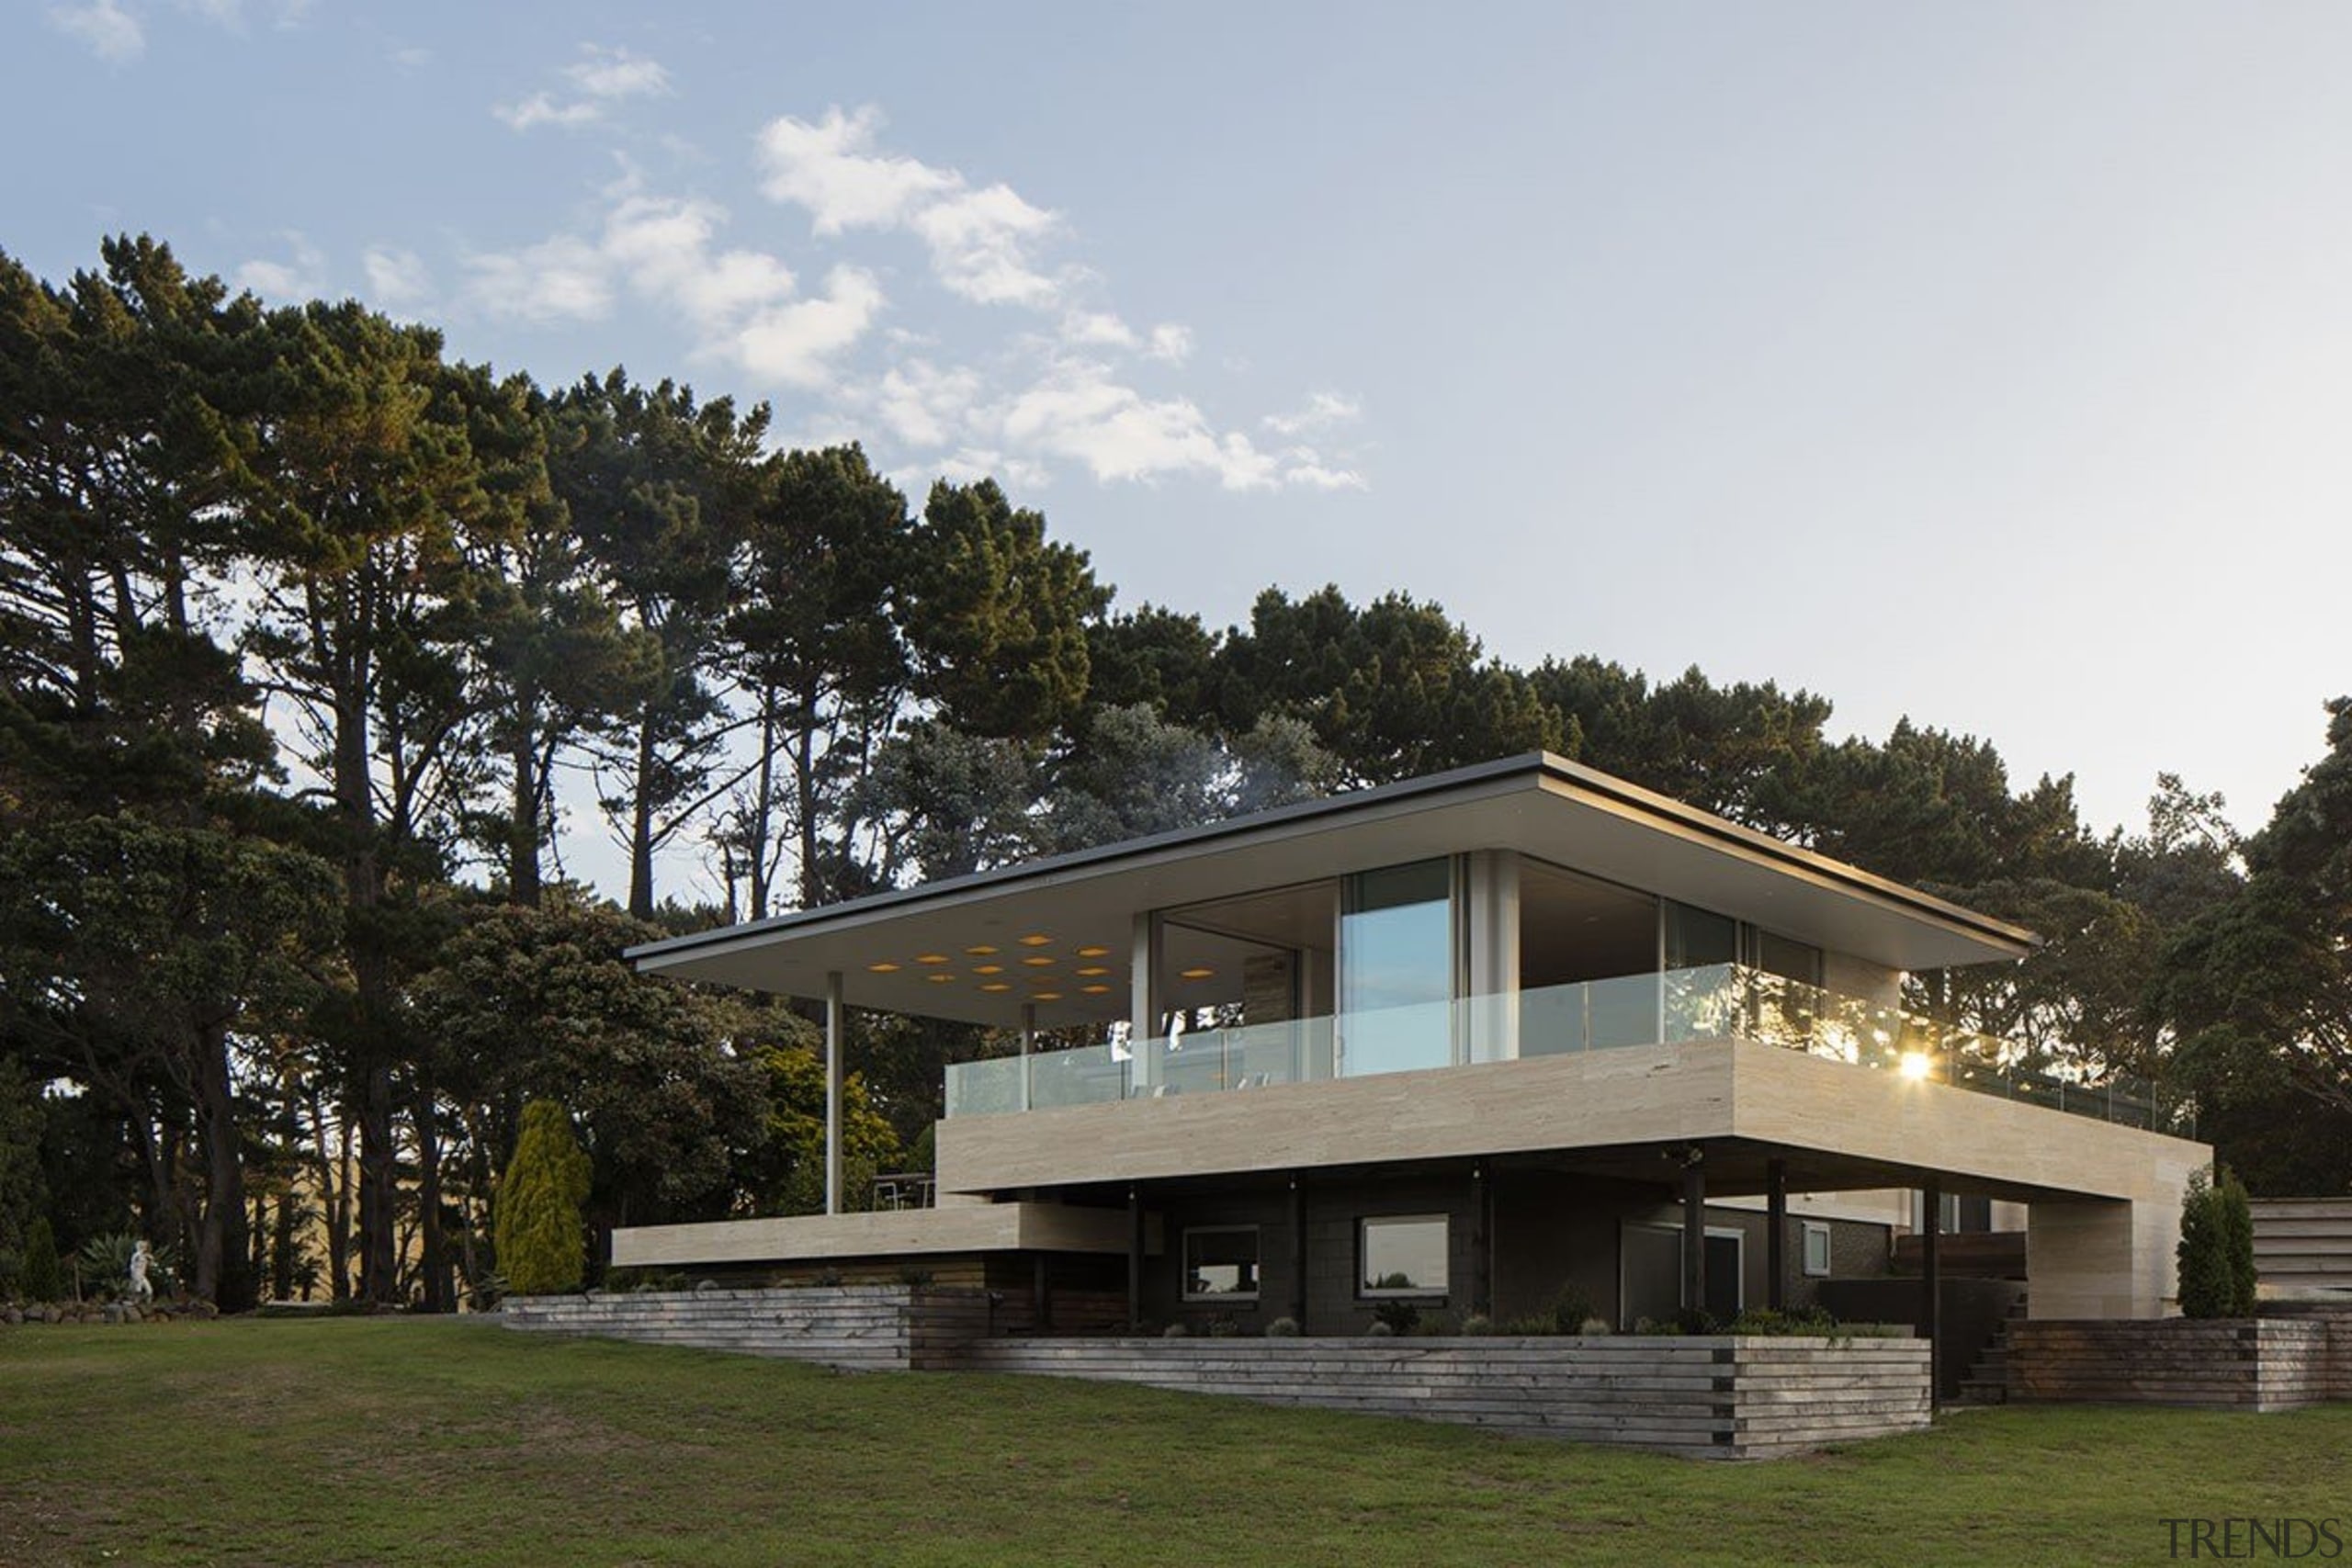 Rowe Baetens Architecture, AucklandSee the full story architecture, building, cottage, estate, facade, home, house, property, real estate, residential area, tree, white, black